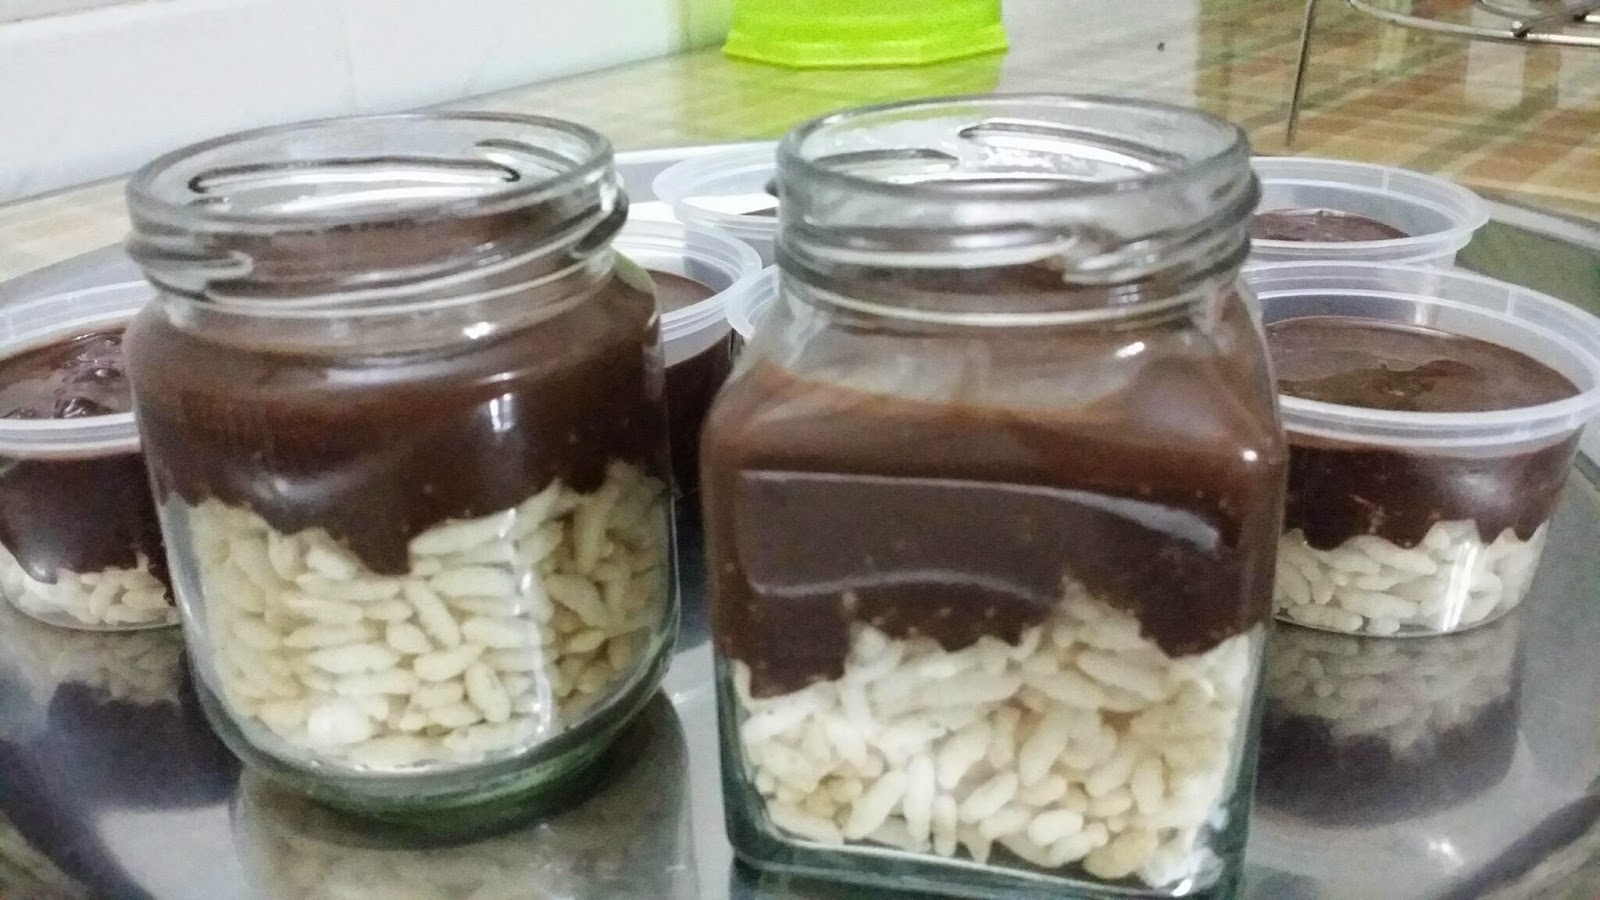 ZULFAZA LOVES COOKING: Chocolate Bubble Rice In Jar